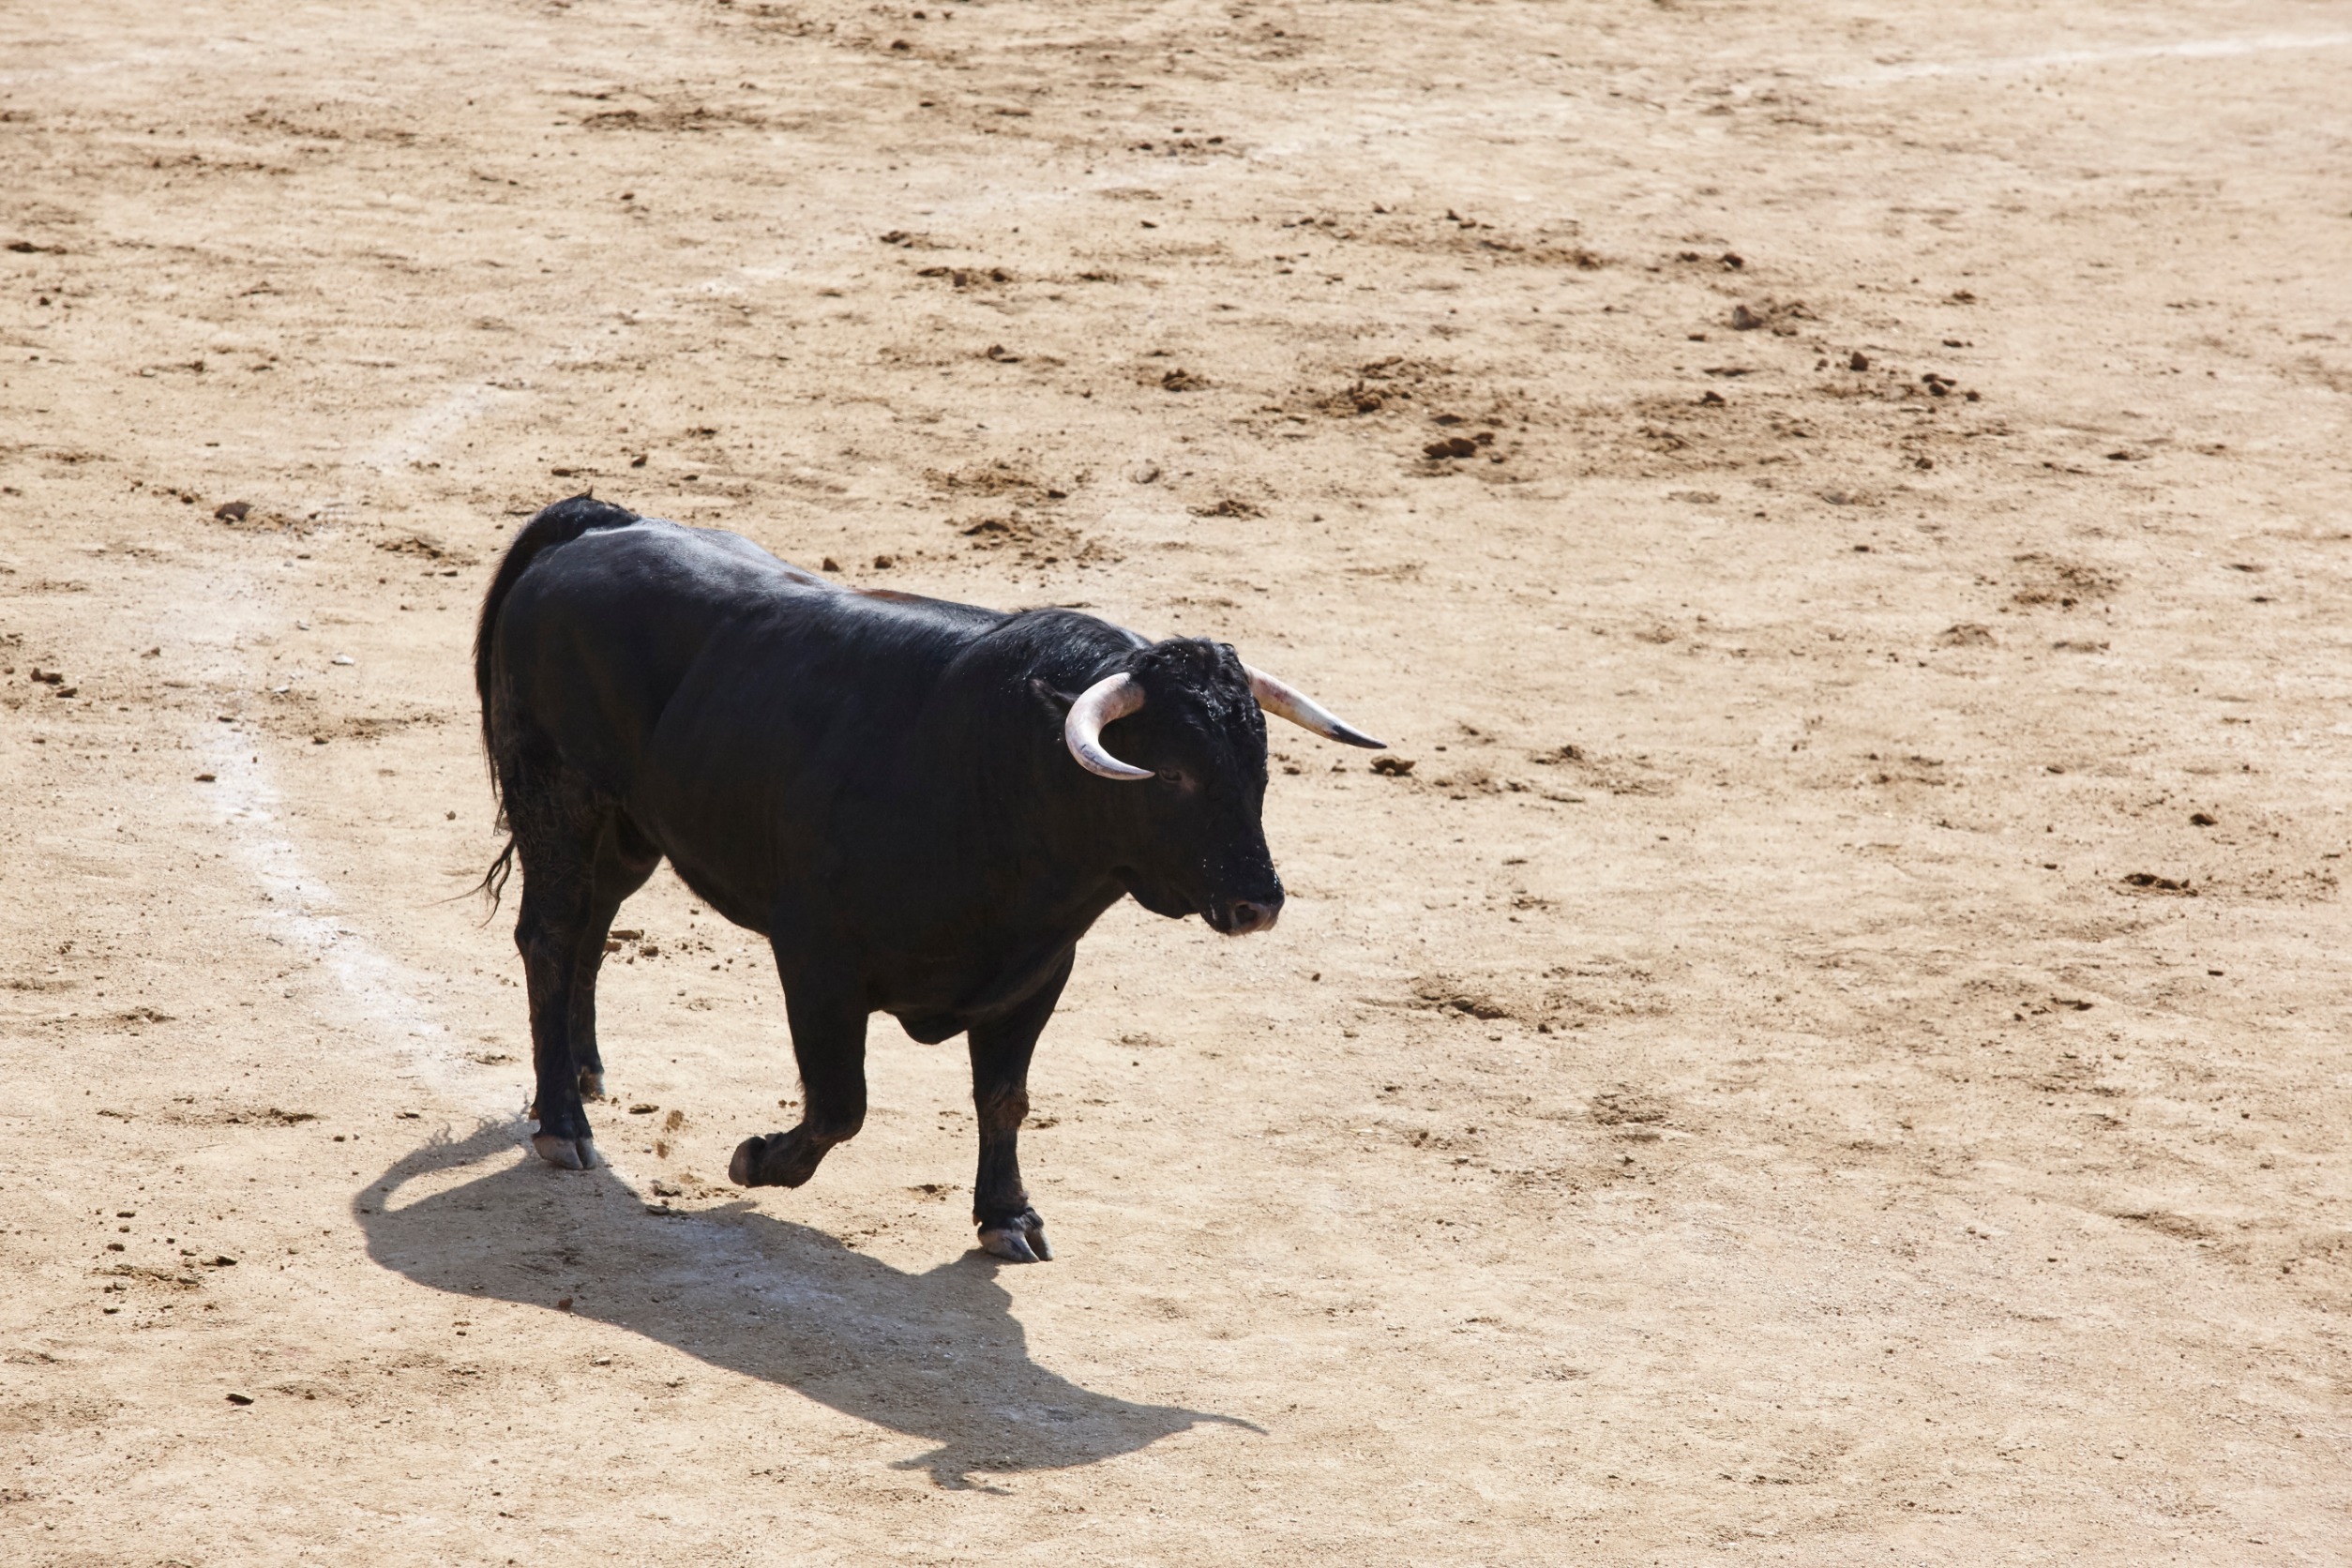 Colombia bans bullfighting, a 